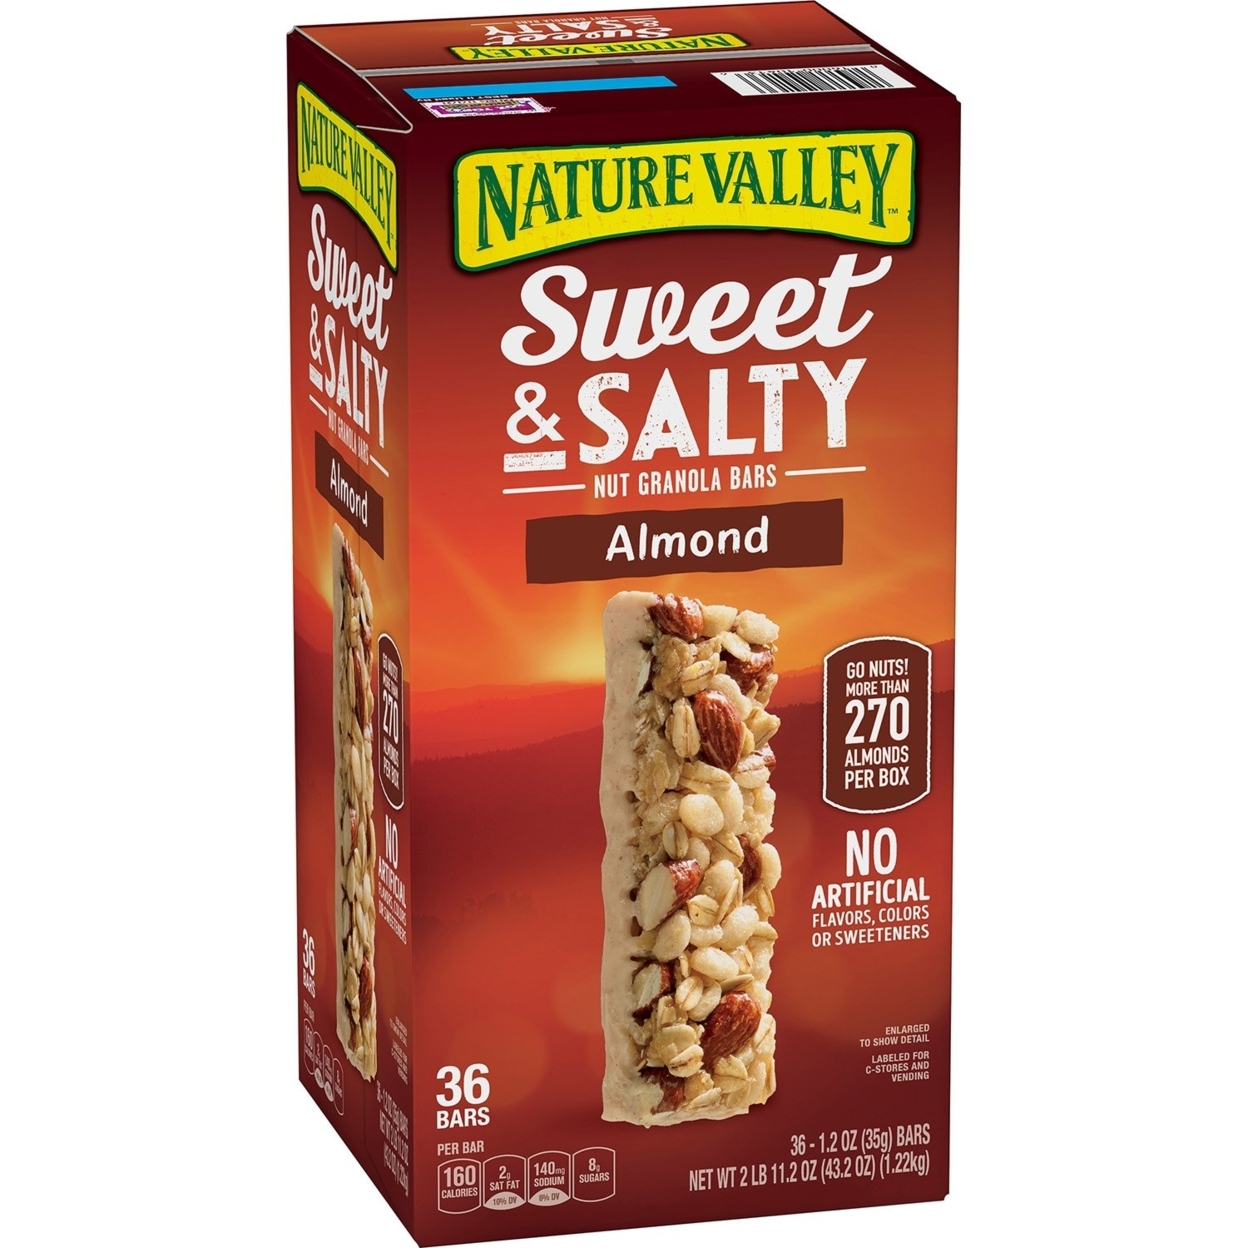 Nature Valley Sweet & Salty Almond Granola Bars (1.2 Ounce Bars, 36 Count)